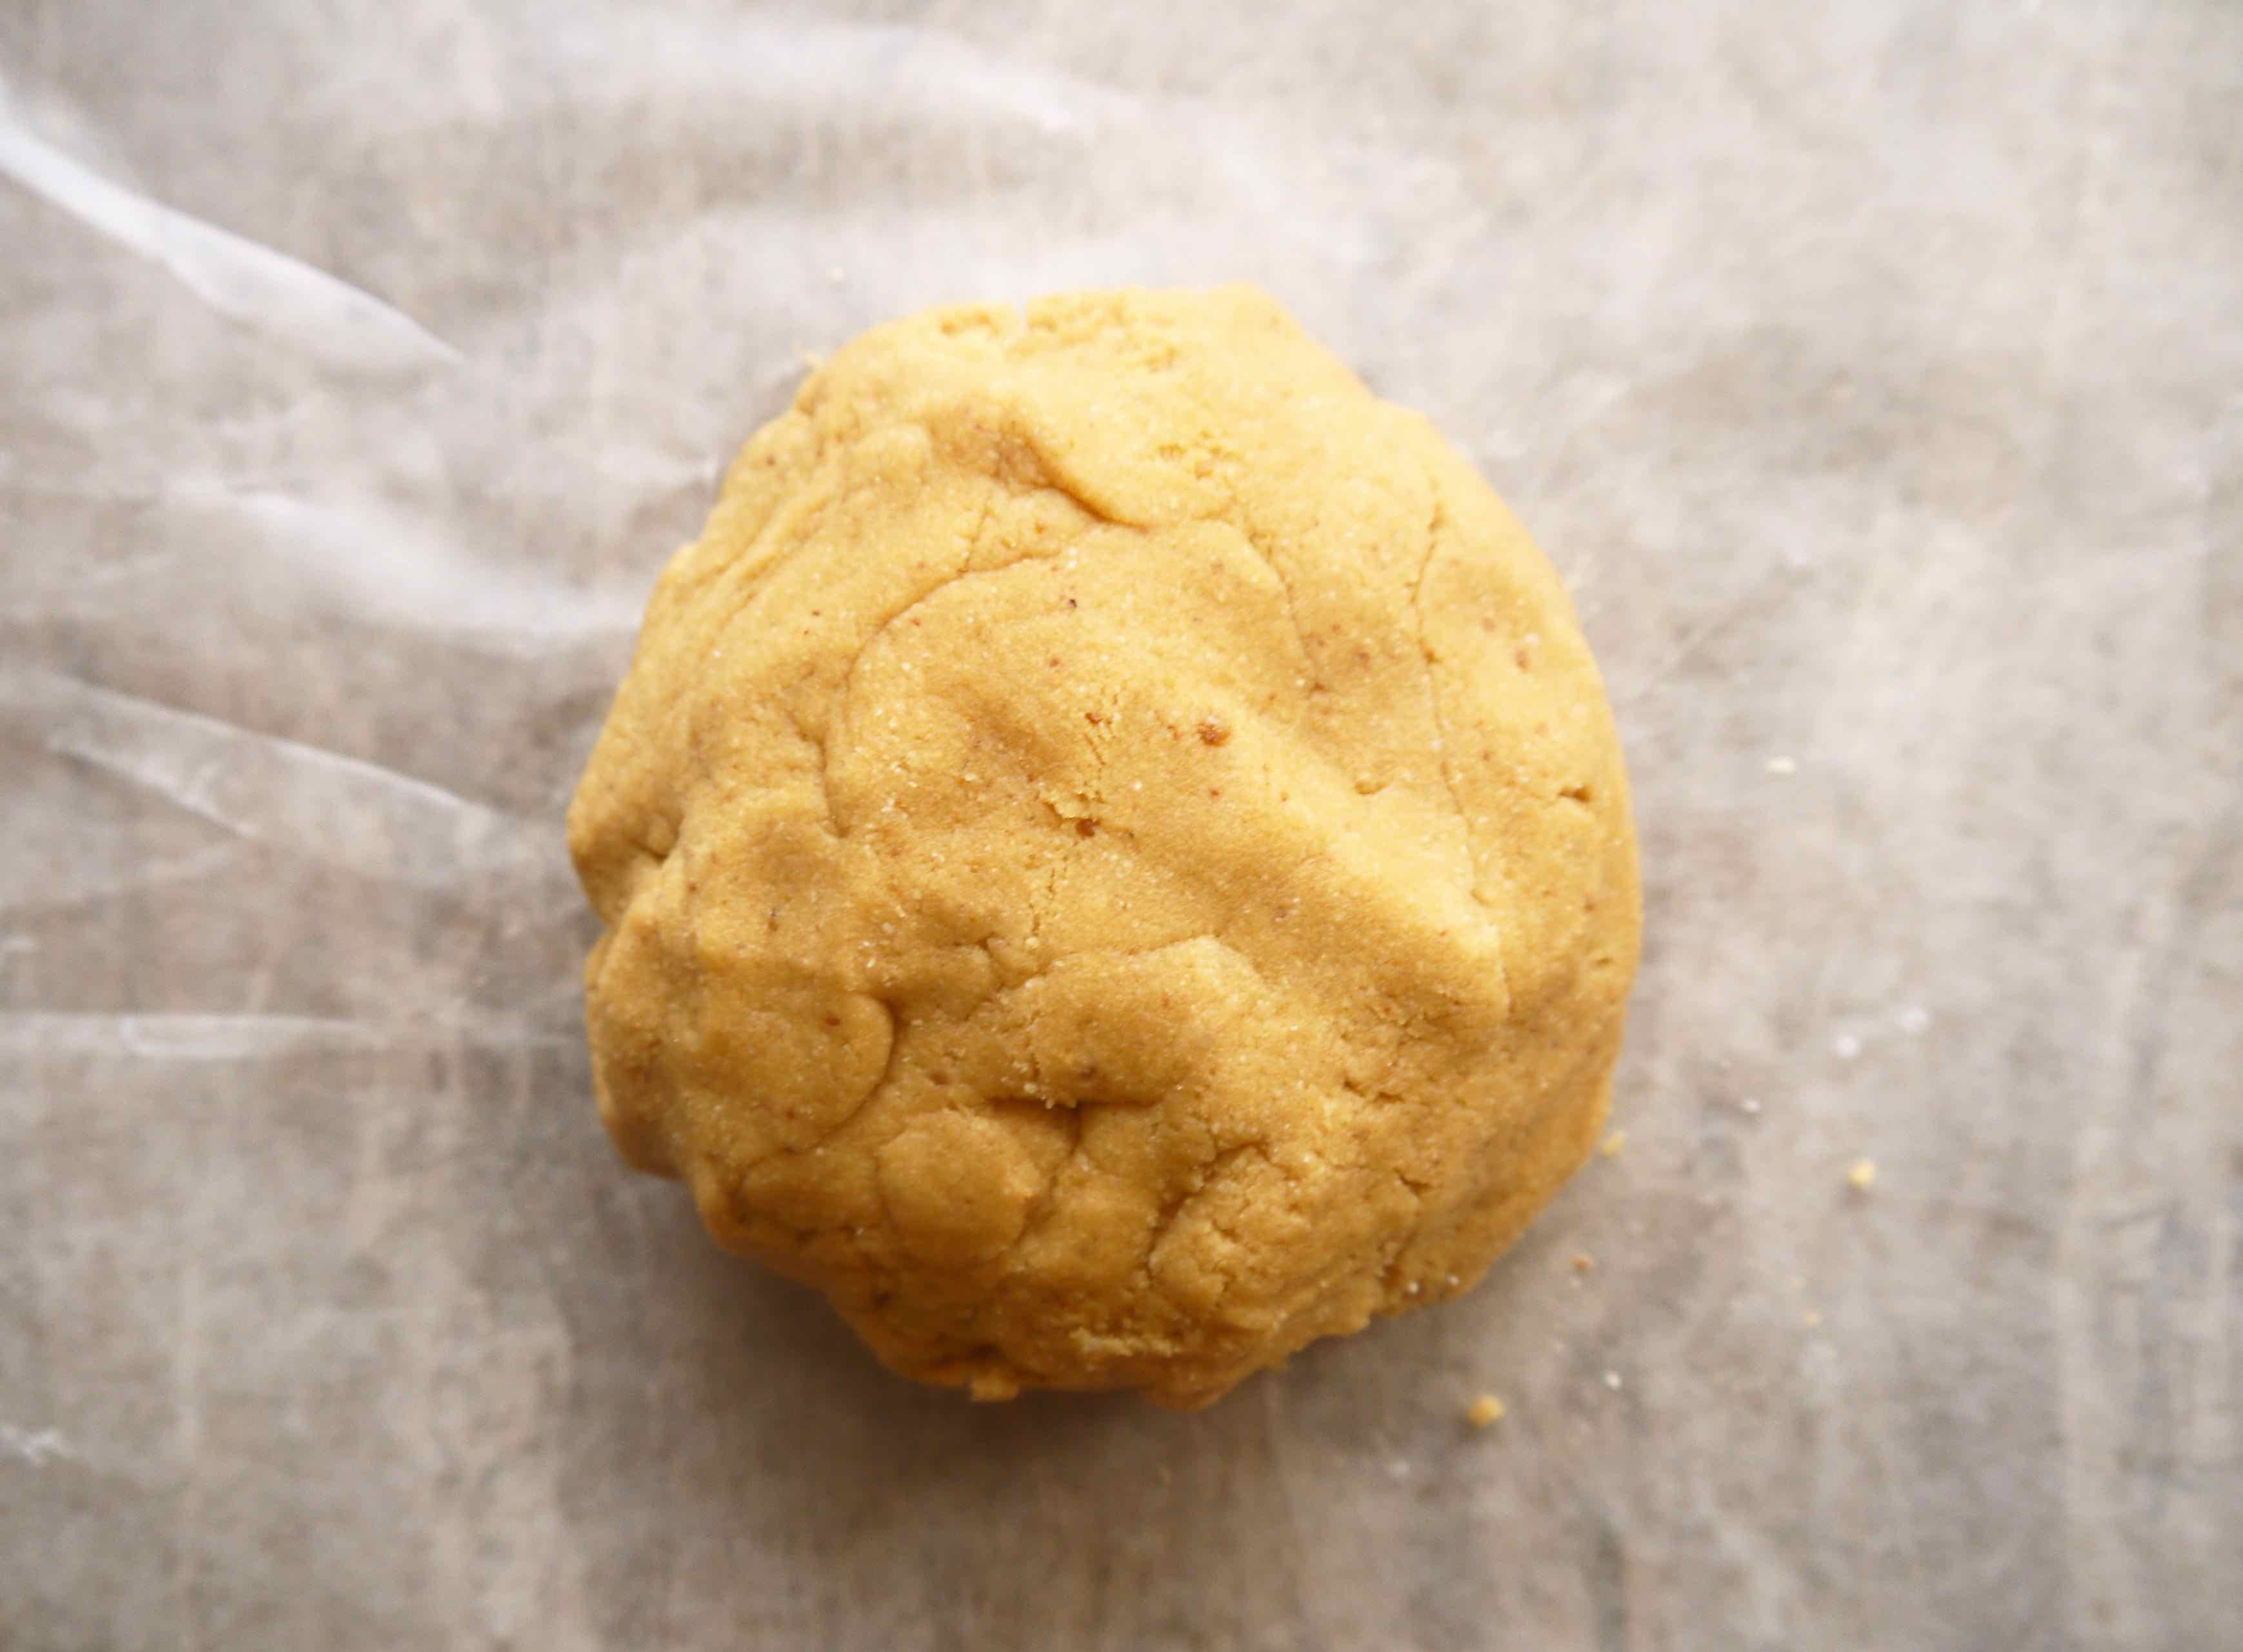  Cookie dough rolled into a ball.